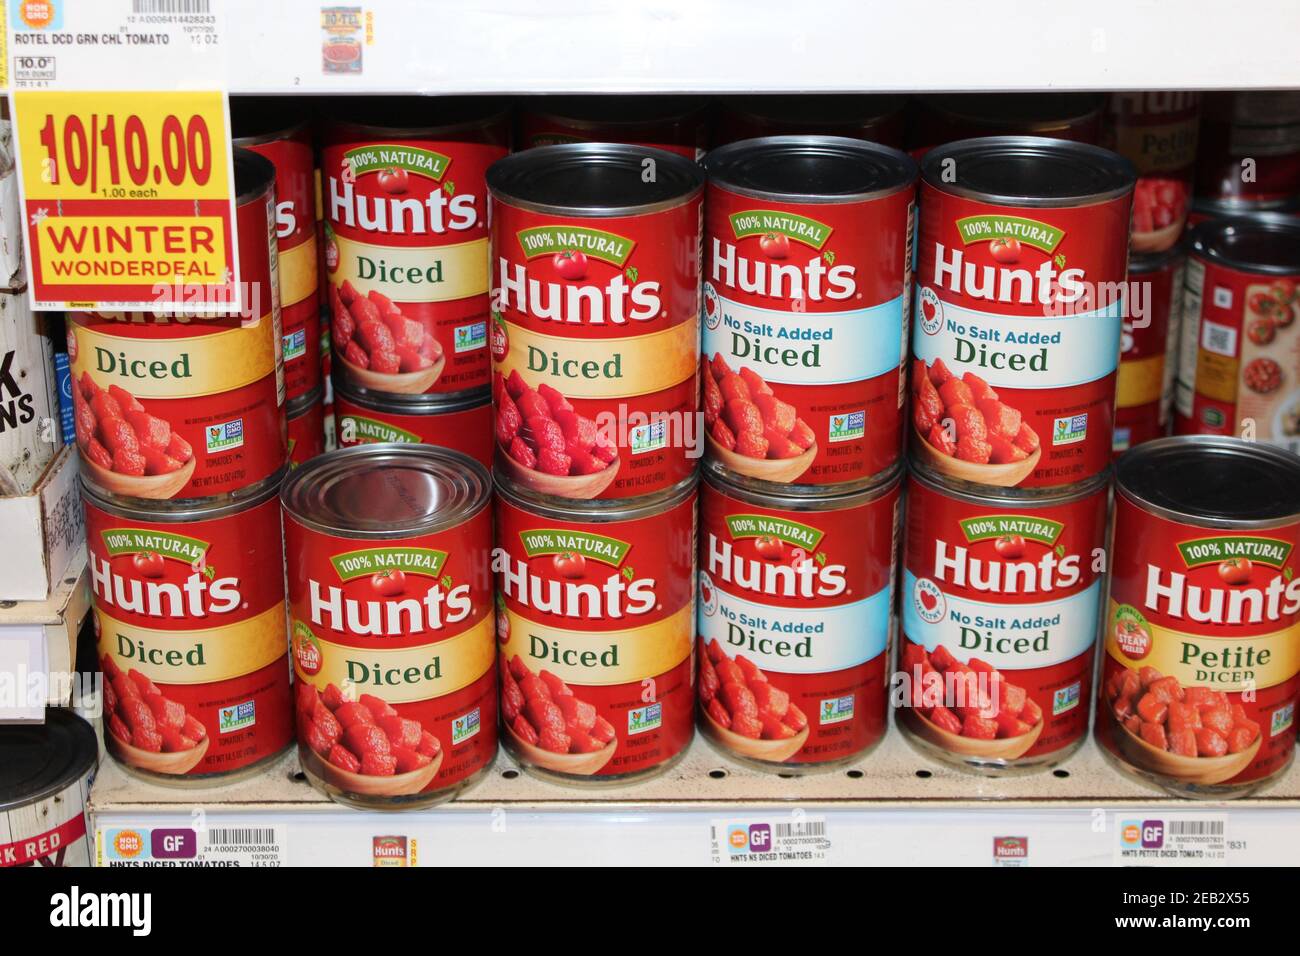 https://c8.alamy.com/comp/2EB2X55/hunts-diced-tomatoes-shot-closeup-on-a-metal-shelf-at-a-discount-store-in-hutchinson-kansas-usa-thats-bright-and-colorful-2EB2X55.jpg